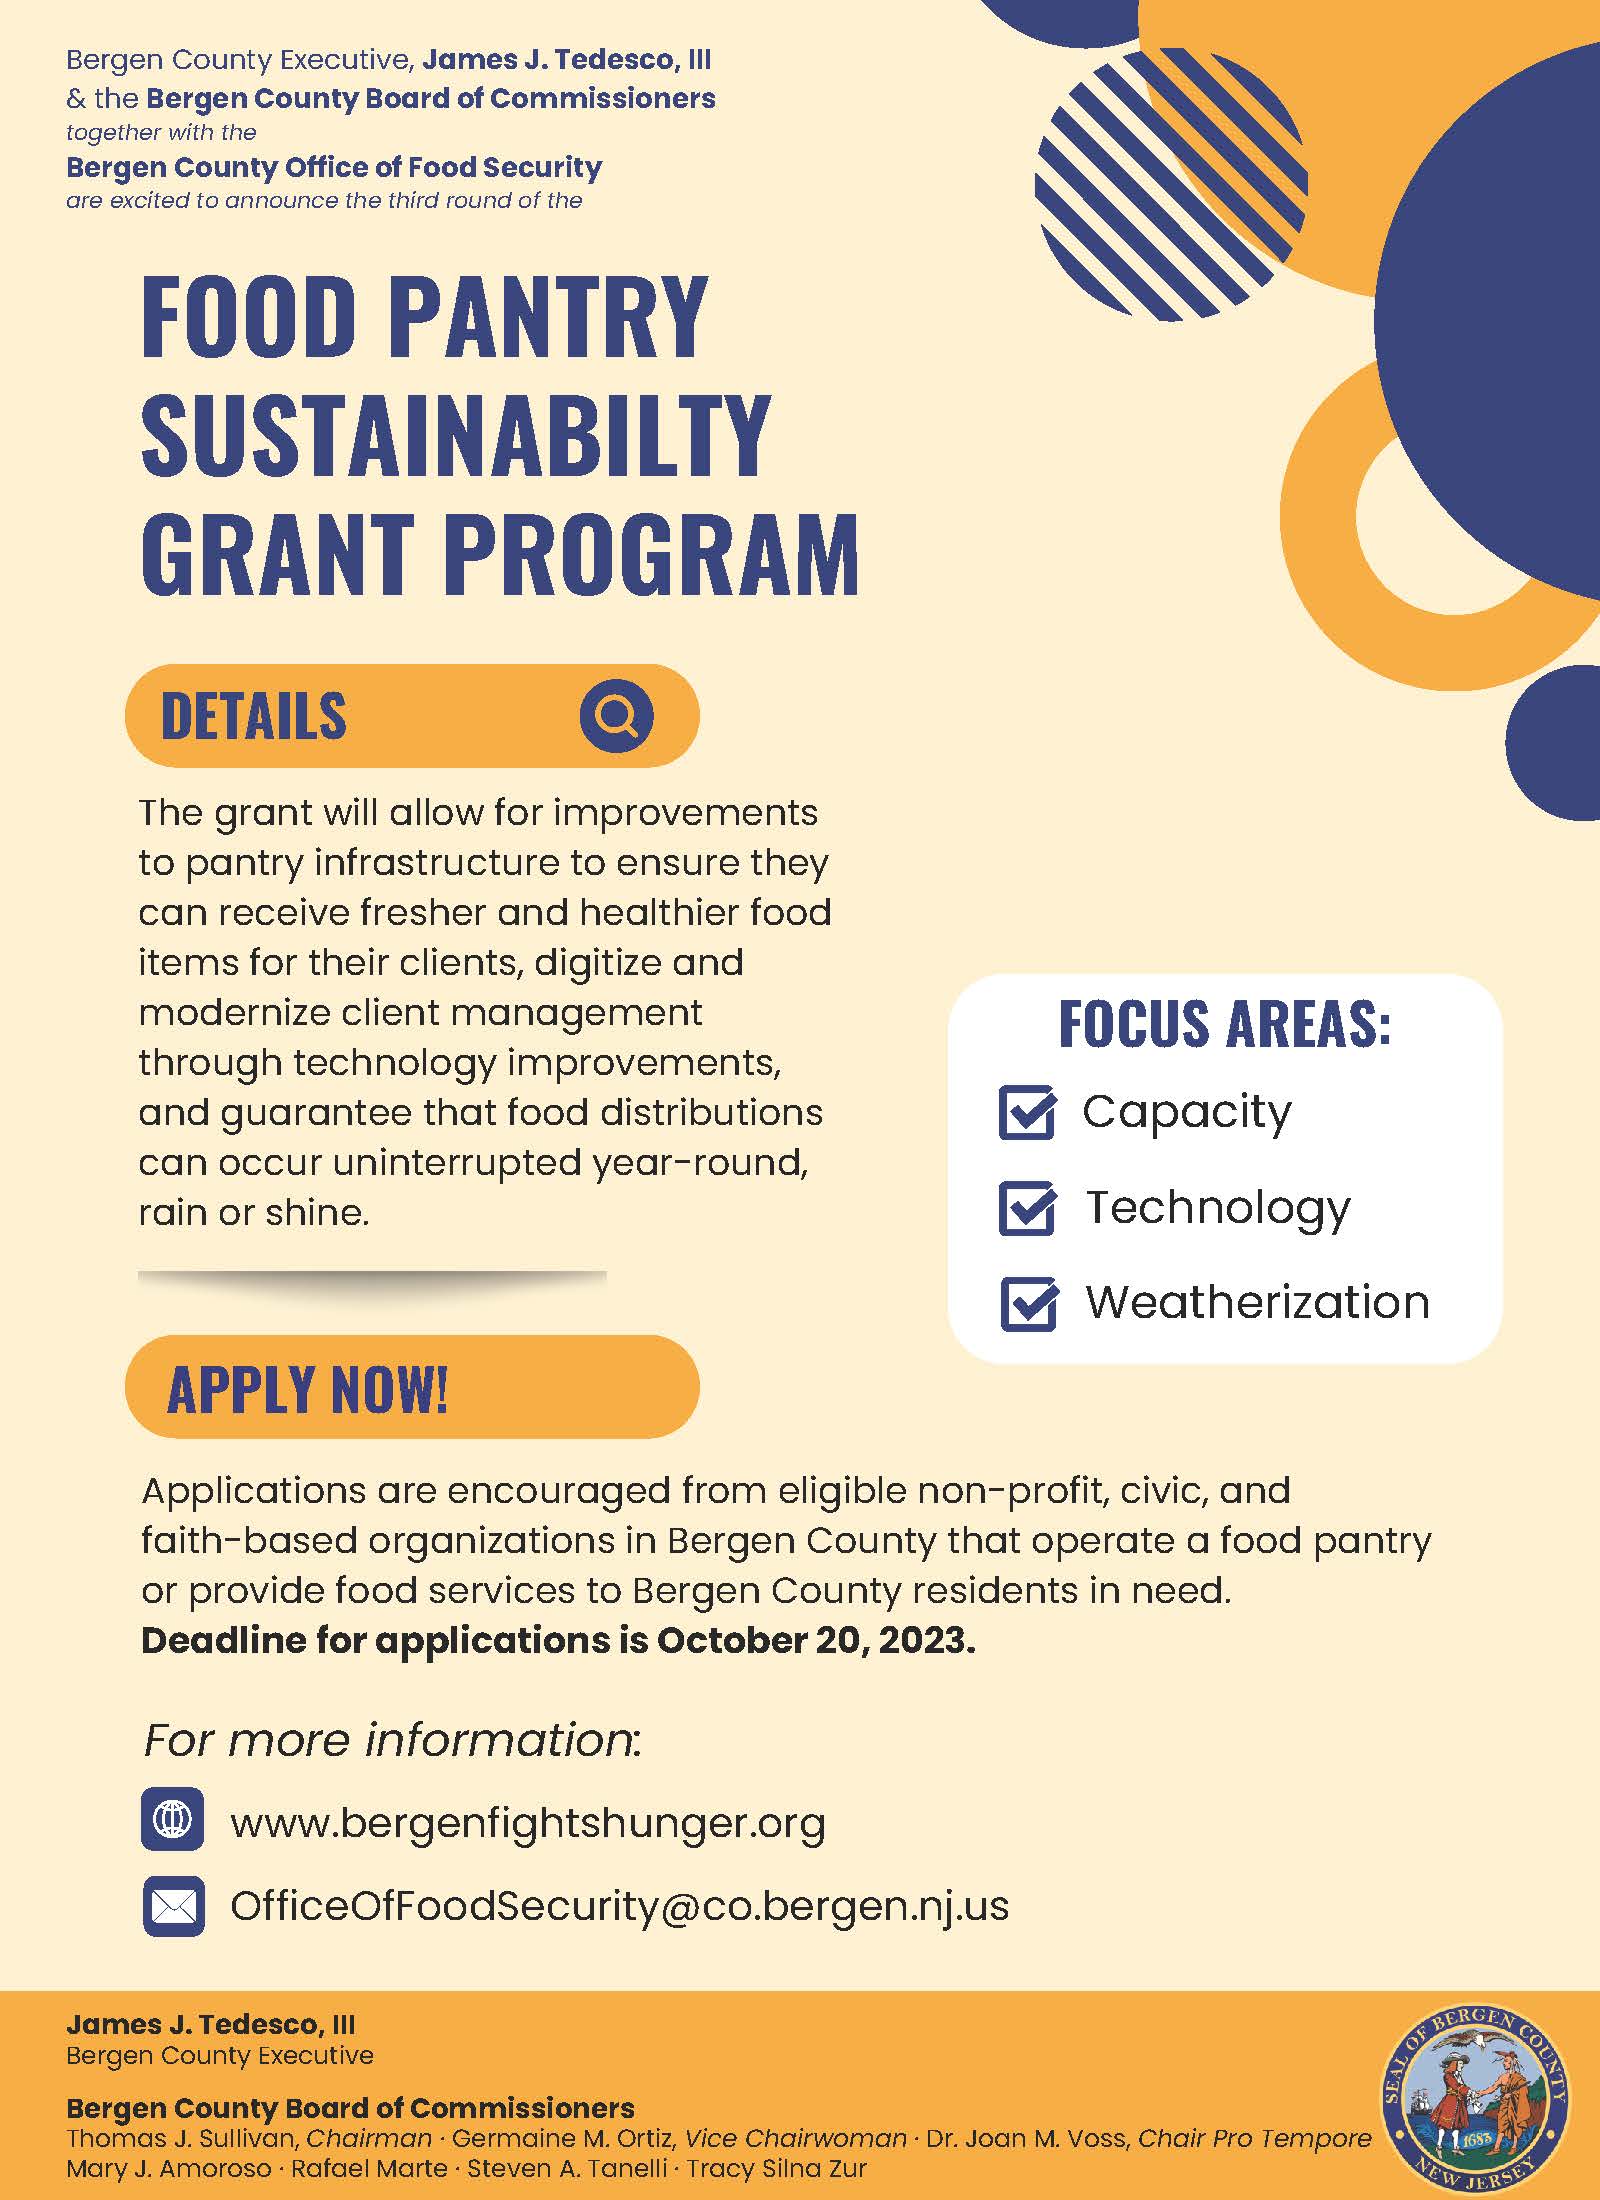 Food Pantry Sustainability Grant